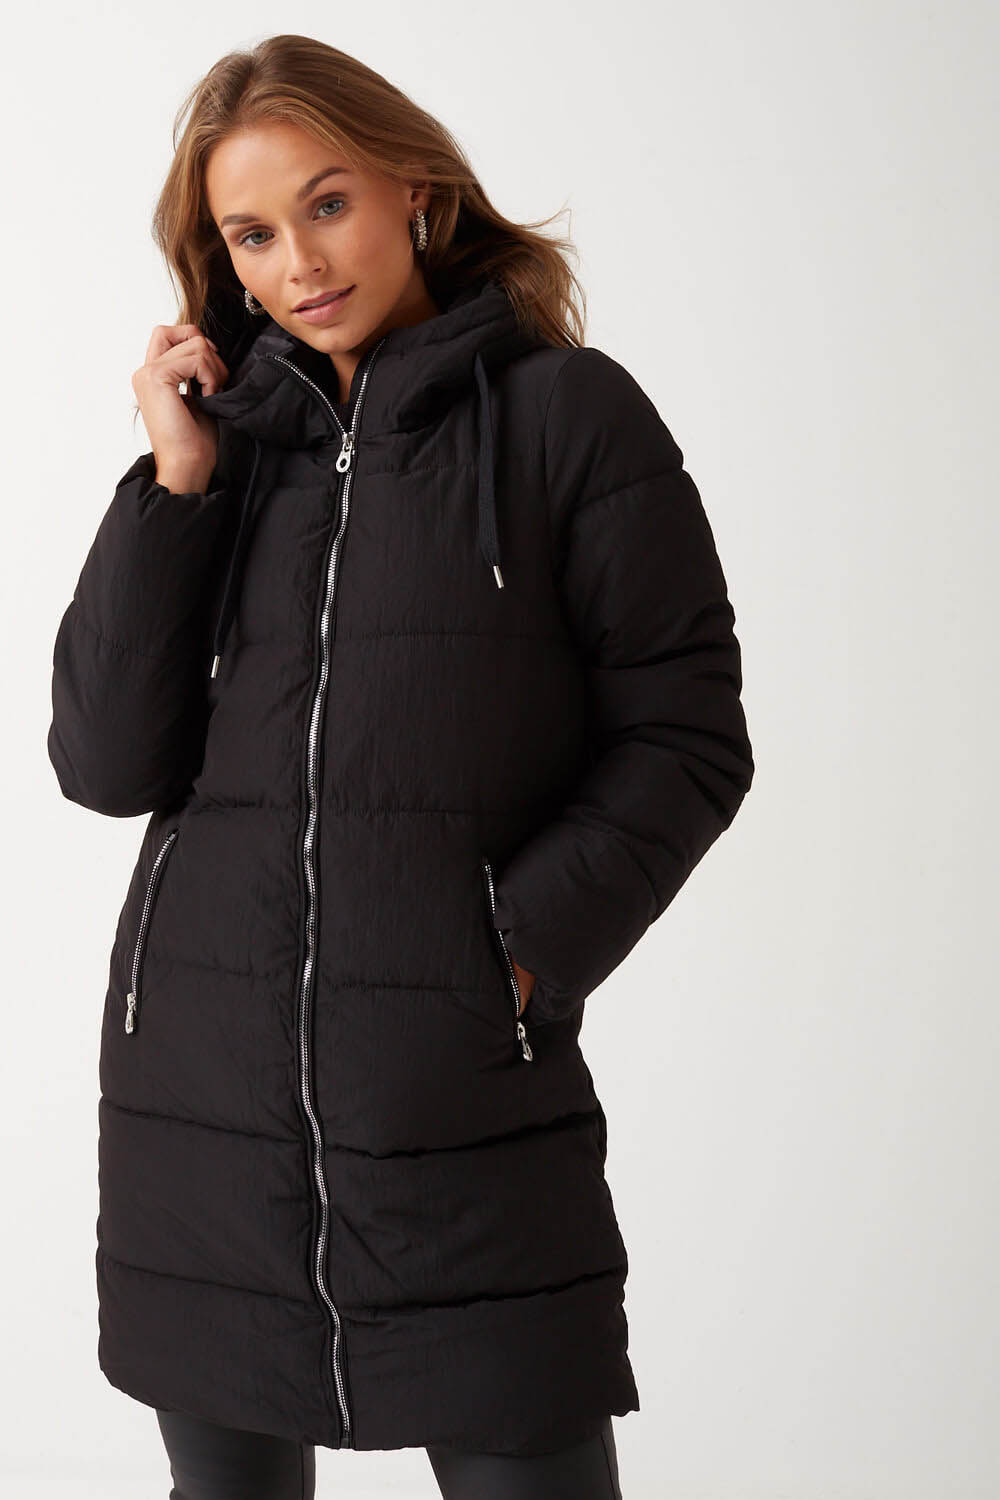 Only Dolly Long Puffer Jacket in Black | iCLOTHING - iCLOTHING